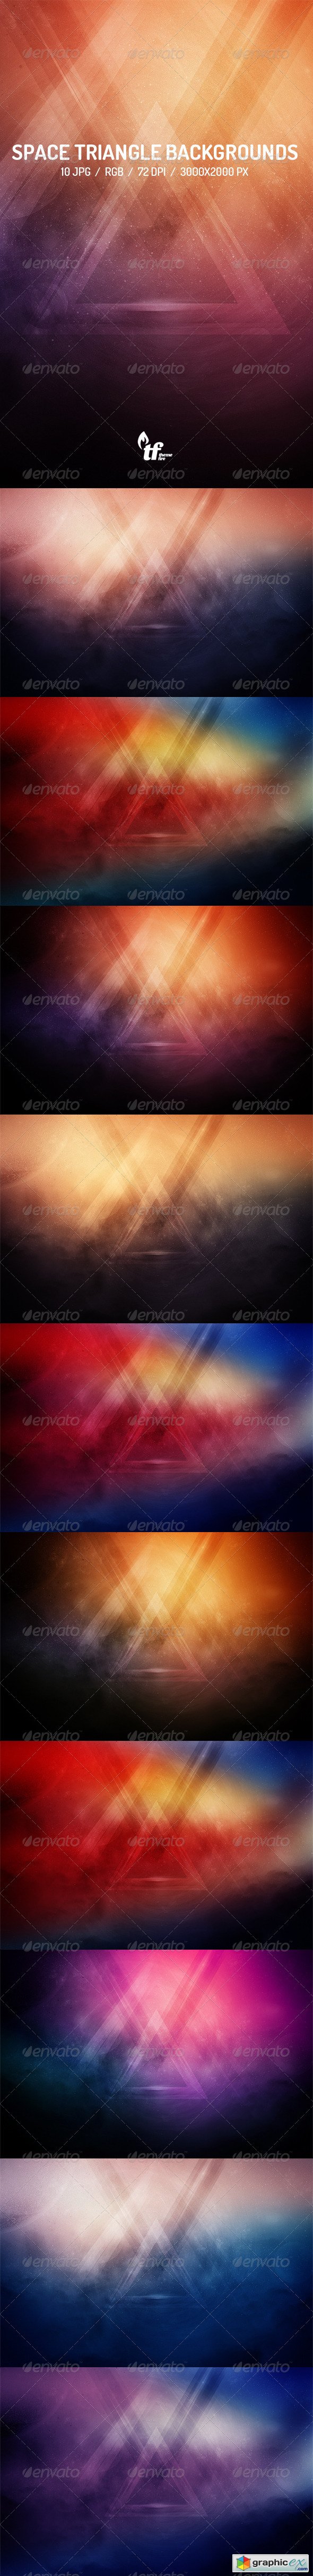 Space Triangle Backgrounds